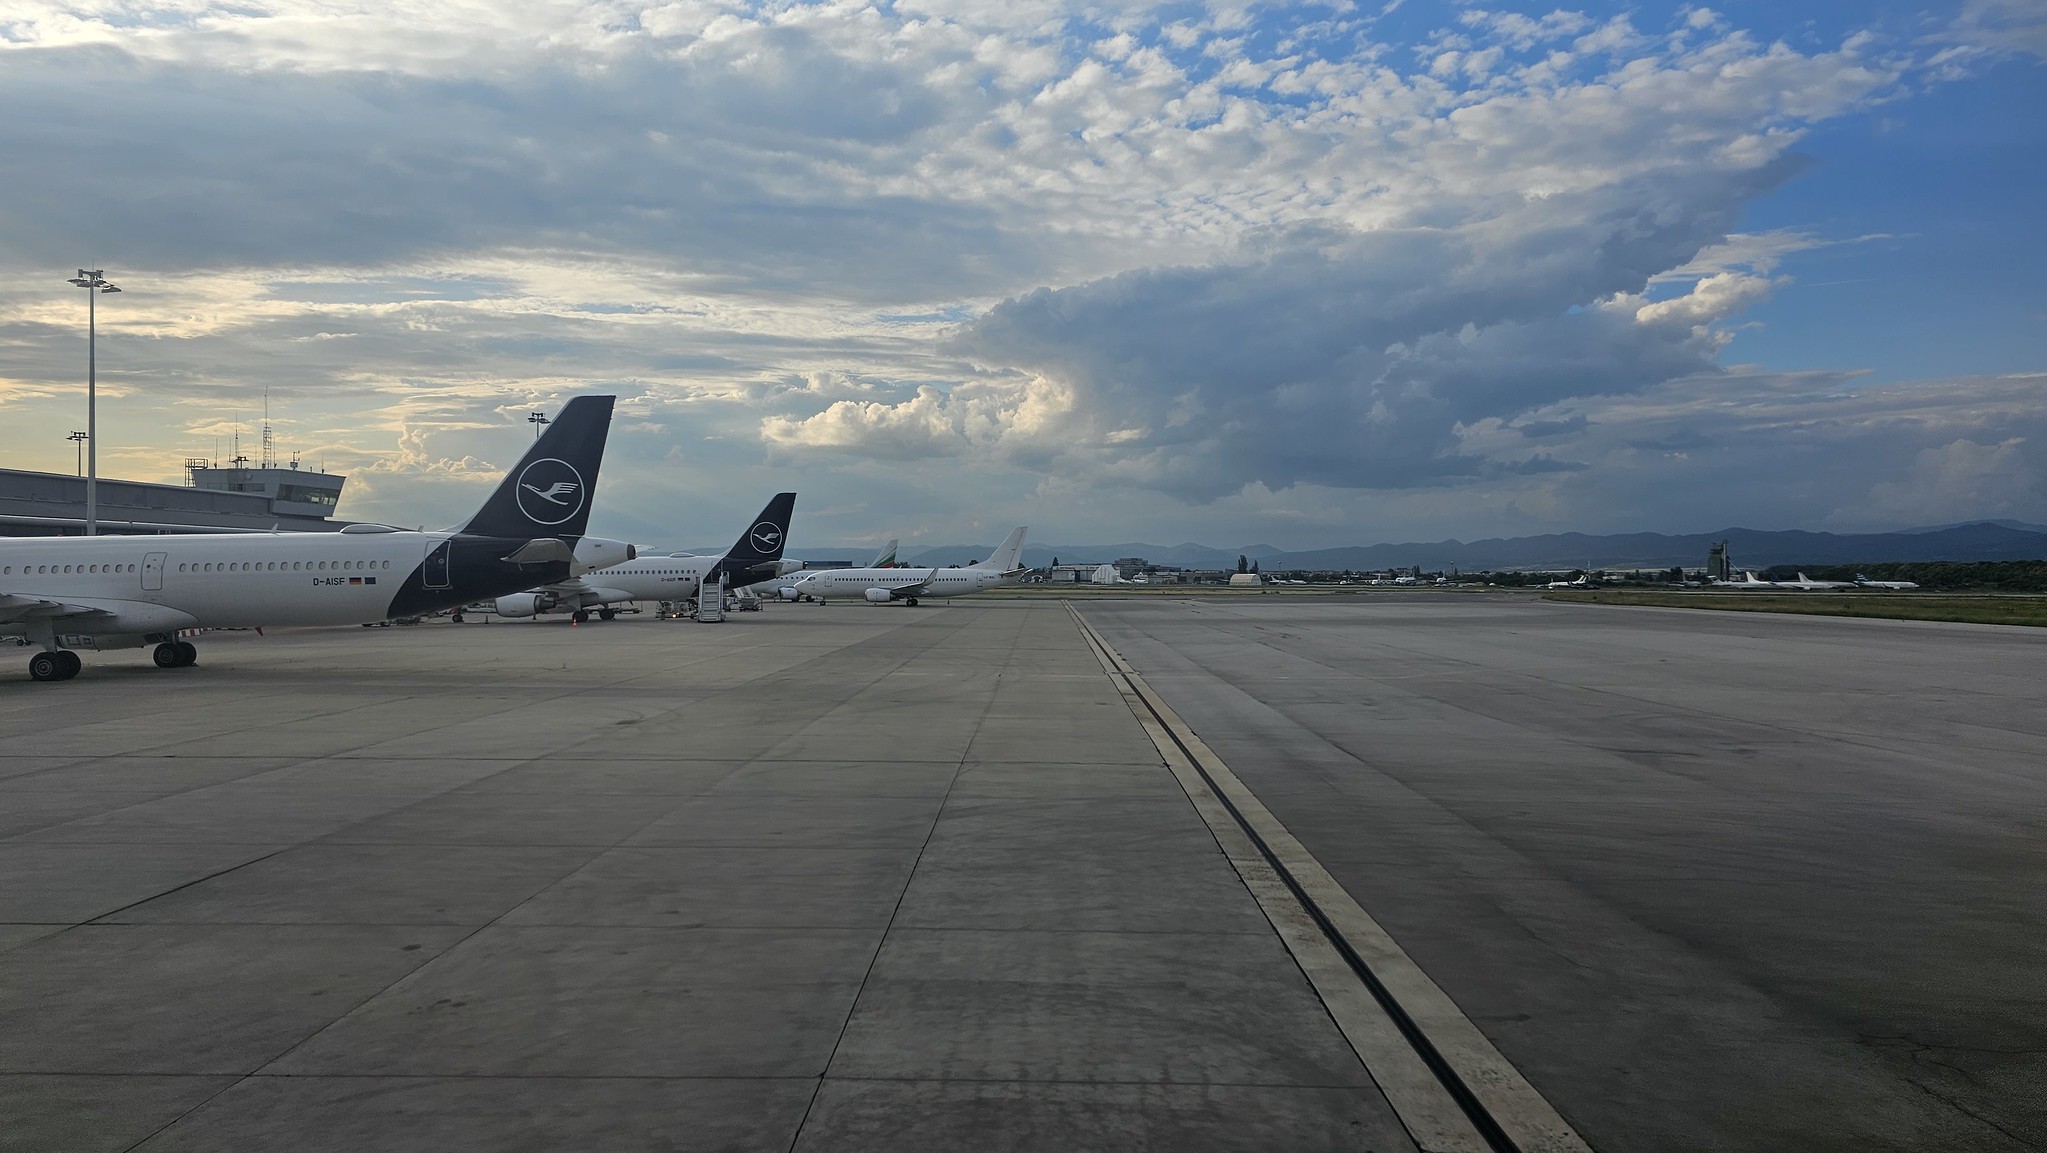 The view at Sofia airport